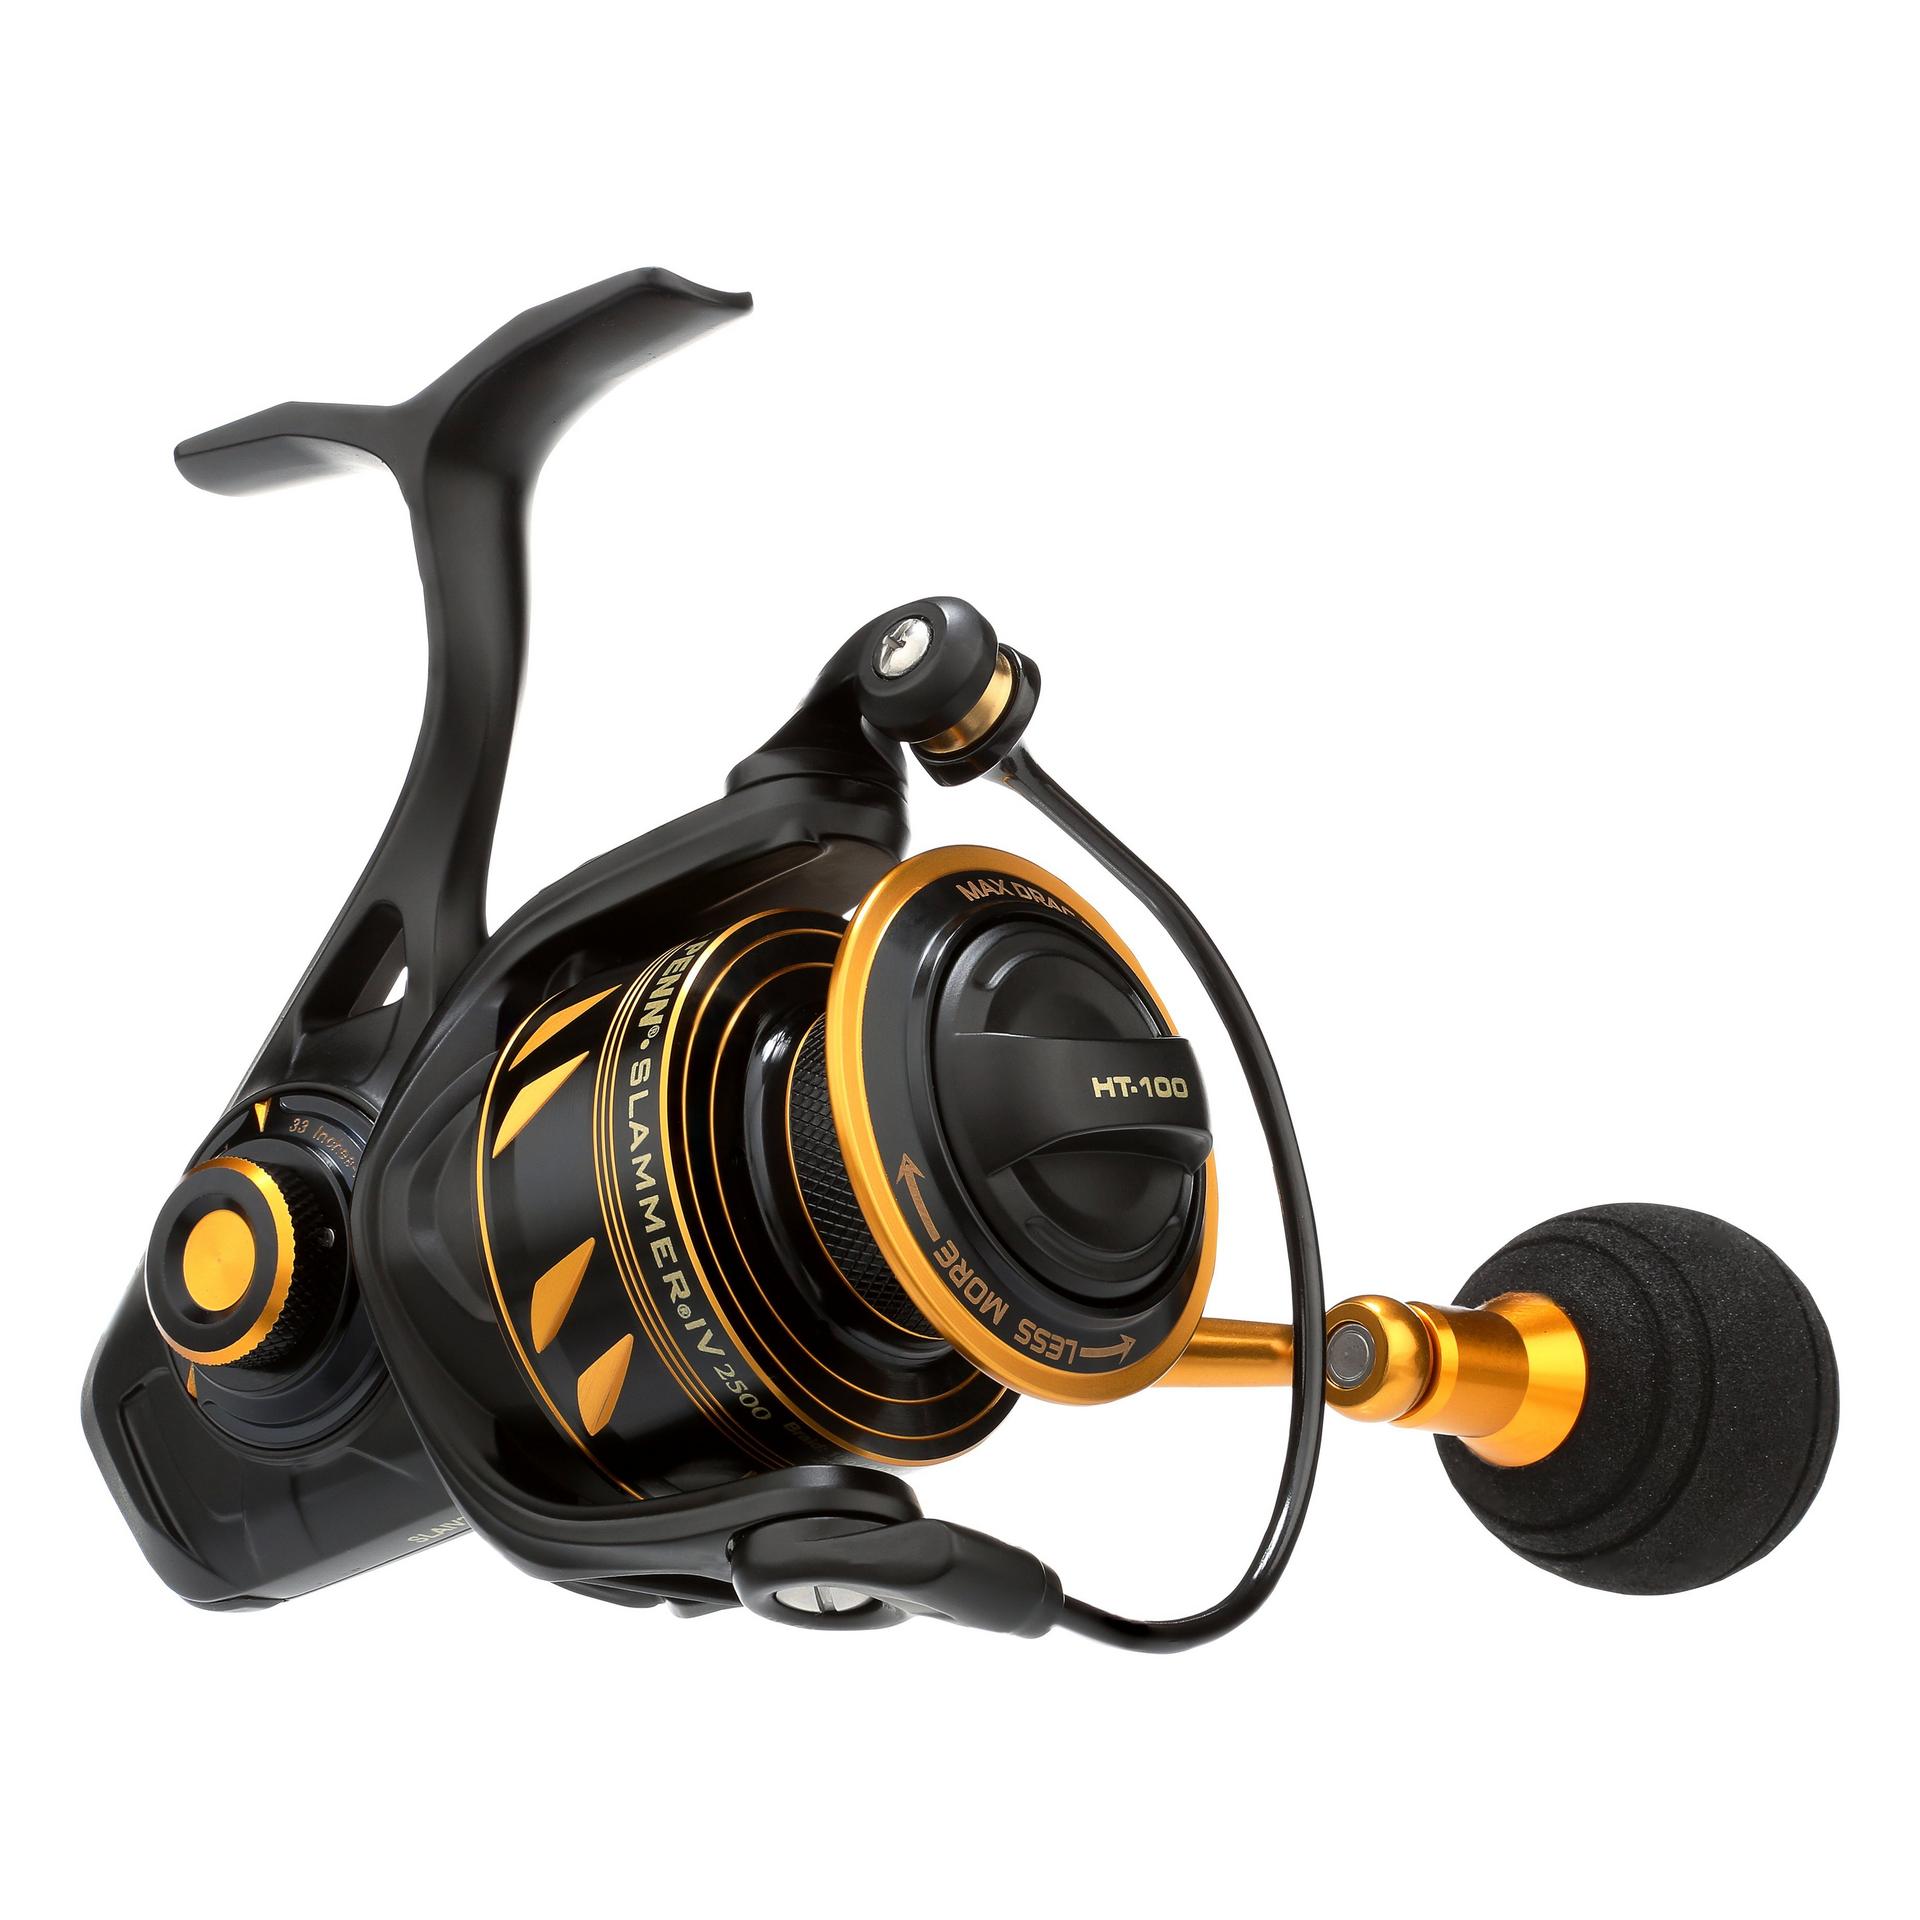 Spincast Reel for Large Fish, 33 Max